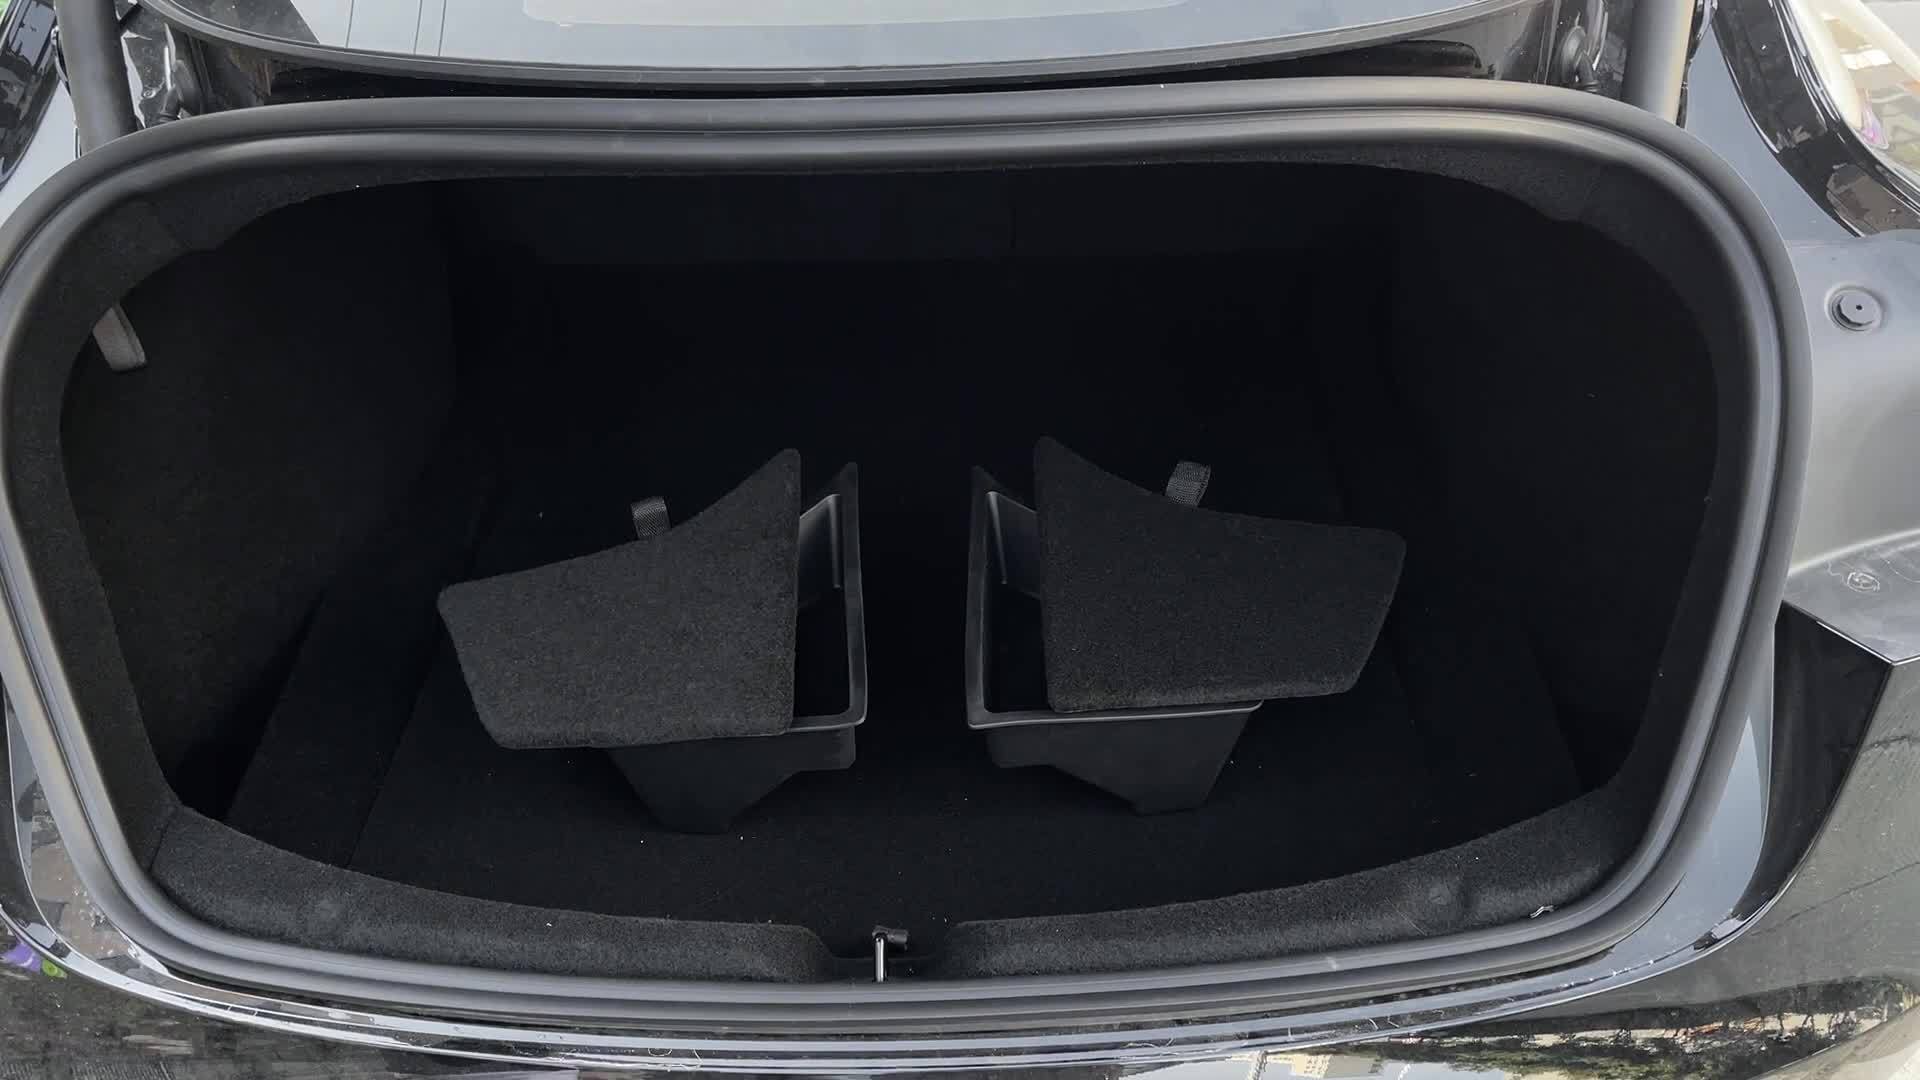 For For Model 3 Highland Trunk Storage Box, Car Trunk Side Storage Box  Under Seat Organizer Tray Flocking Mat Partition Board Stowing Tidying